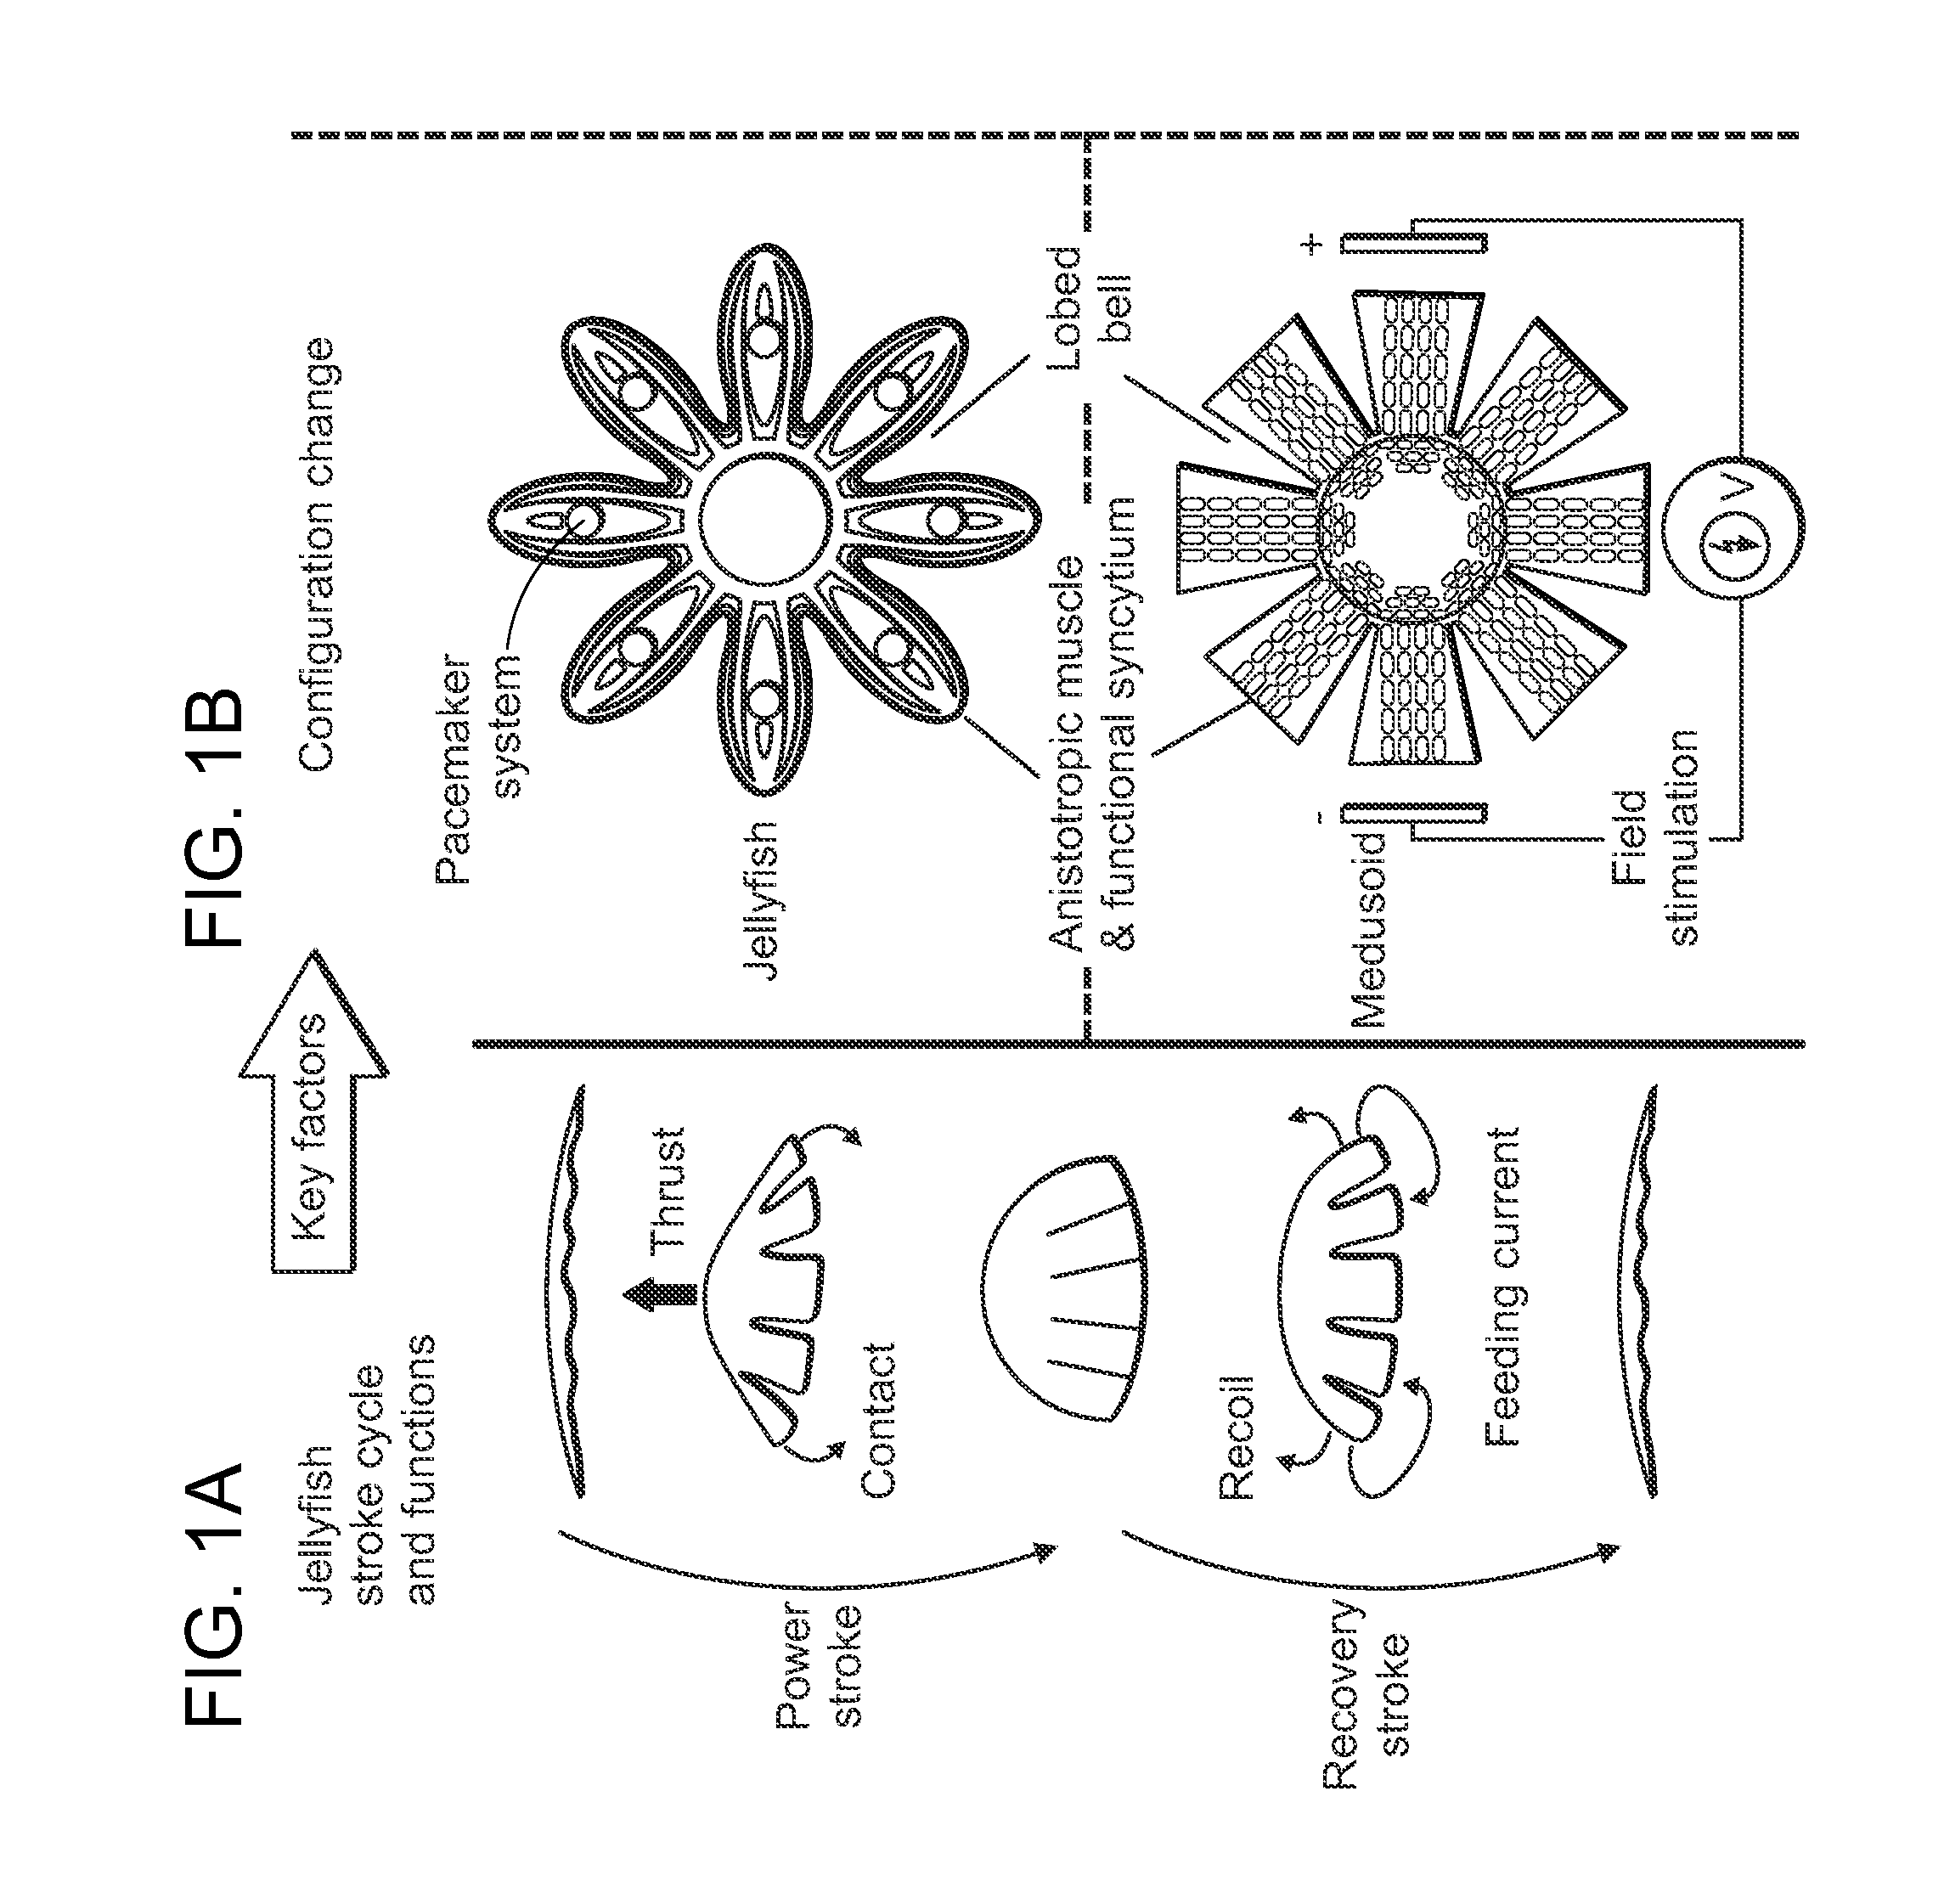 Tissue-engineered pumps and valves and uses thereof